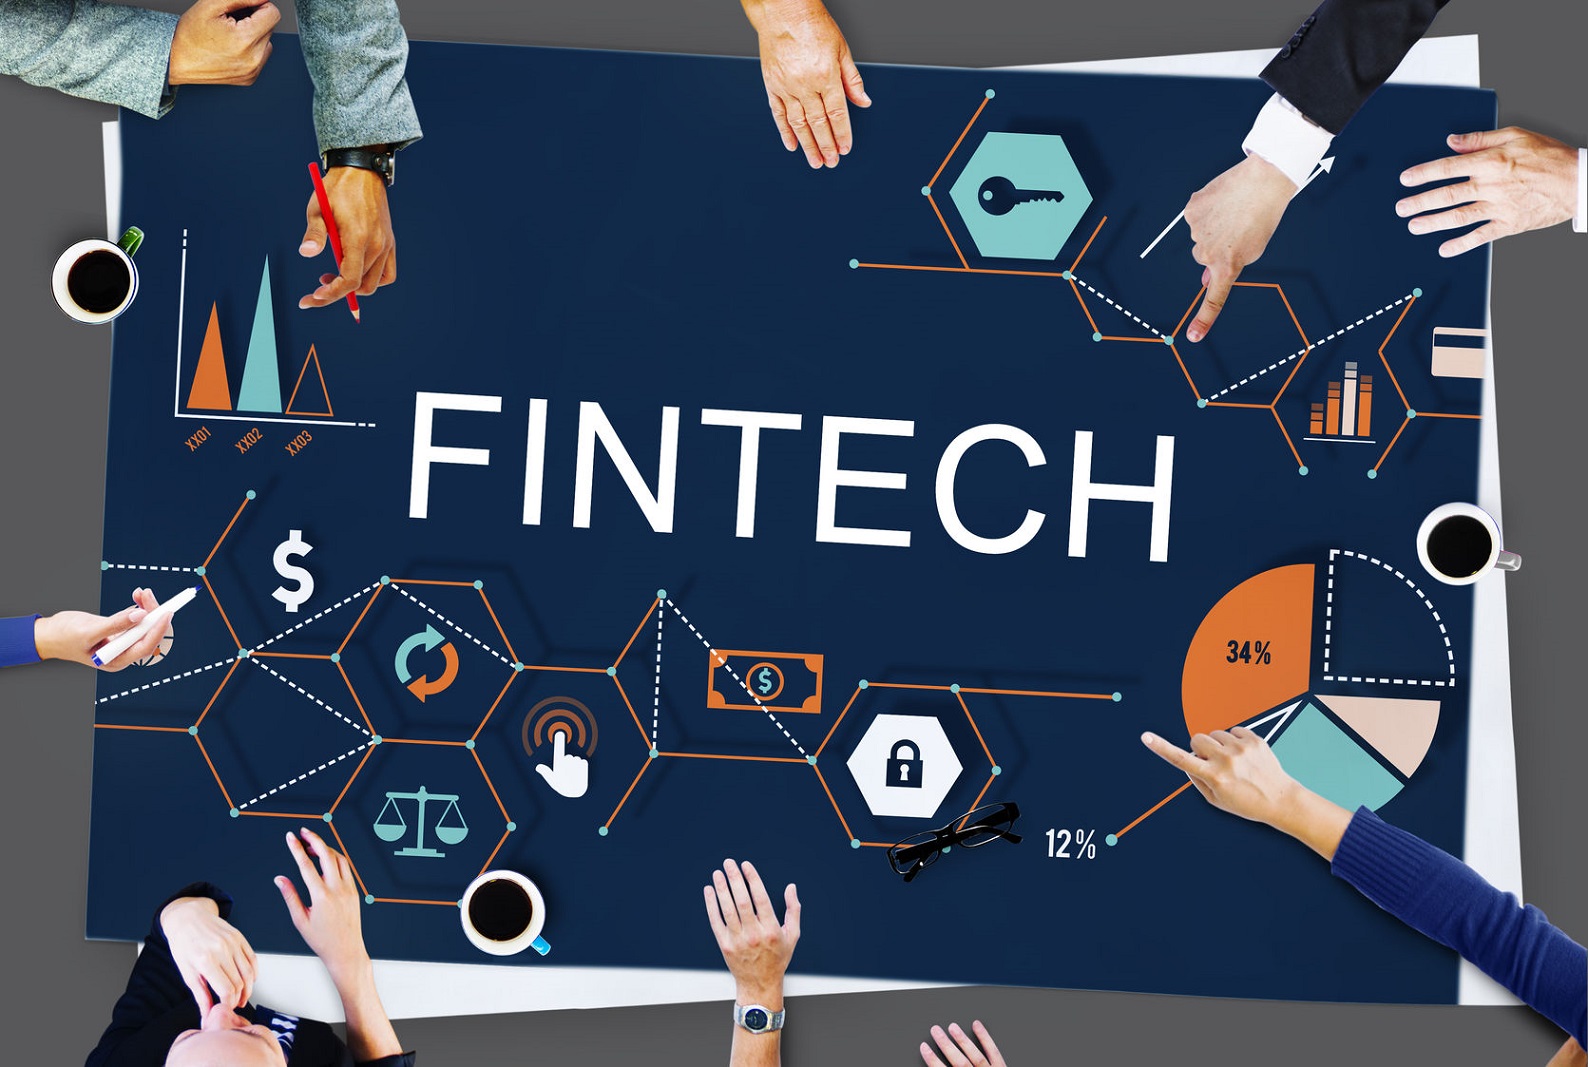 ICAEW and ISCA launch research report on fintech innovation